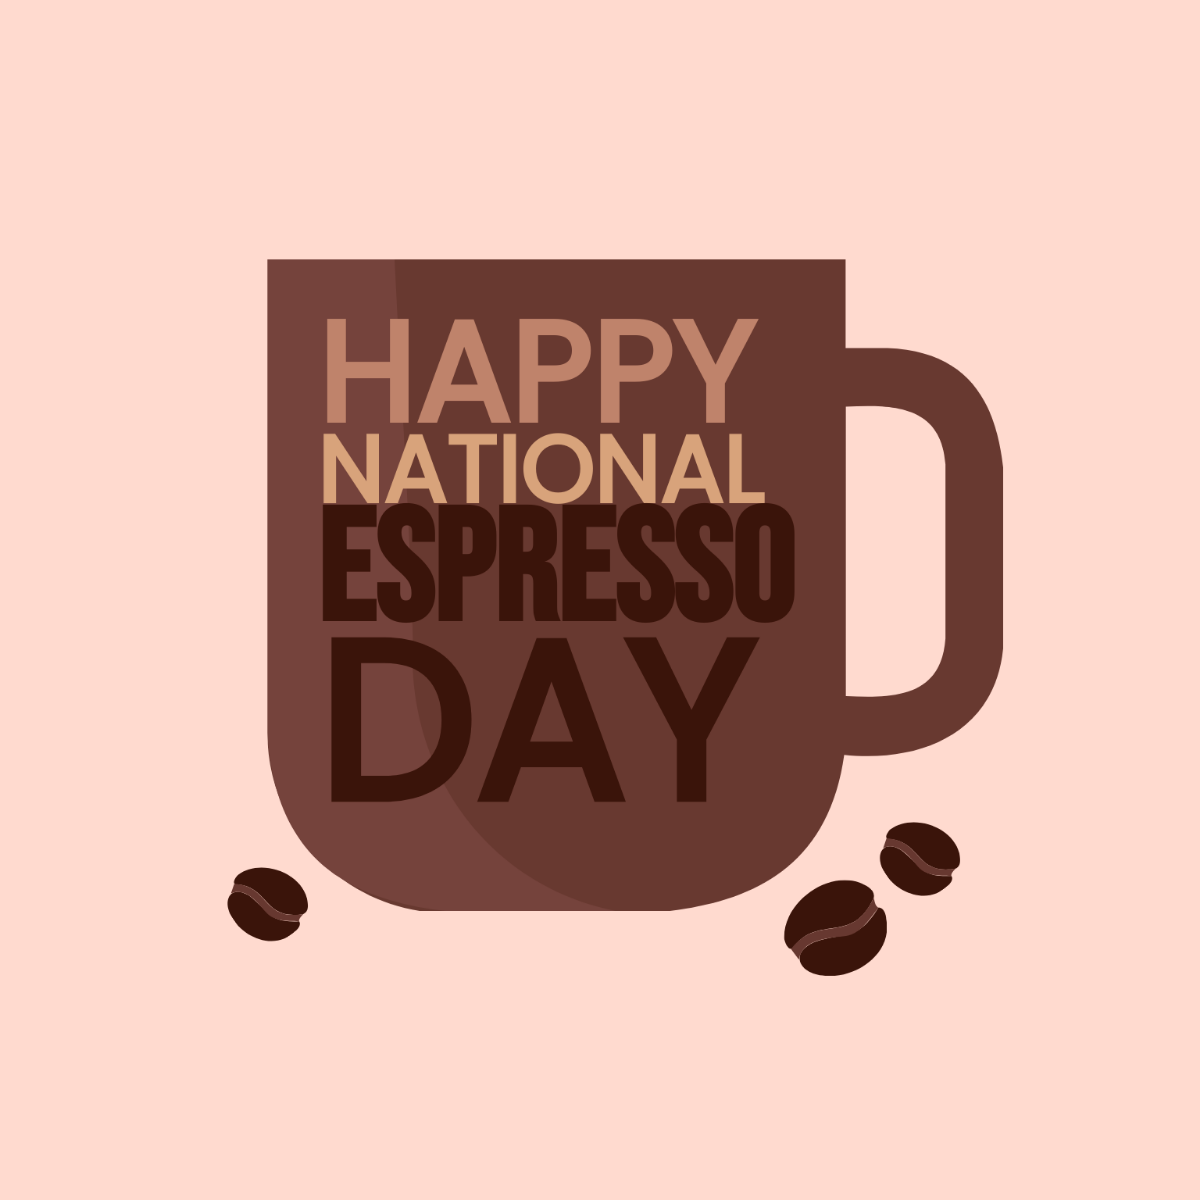 Happy National Espresso Day Illustration Template